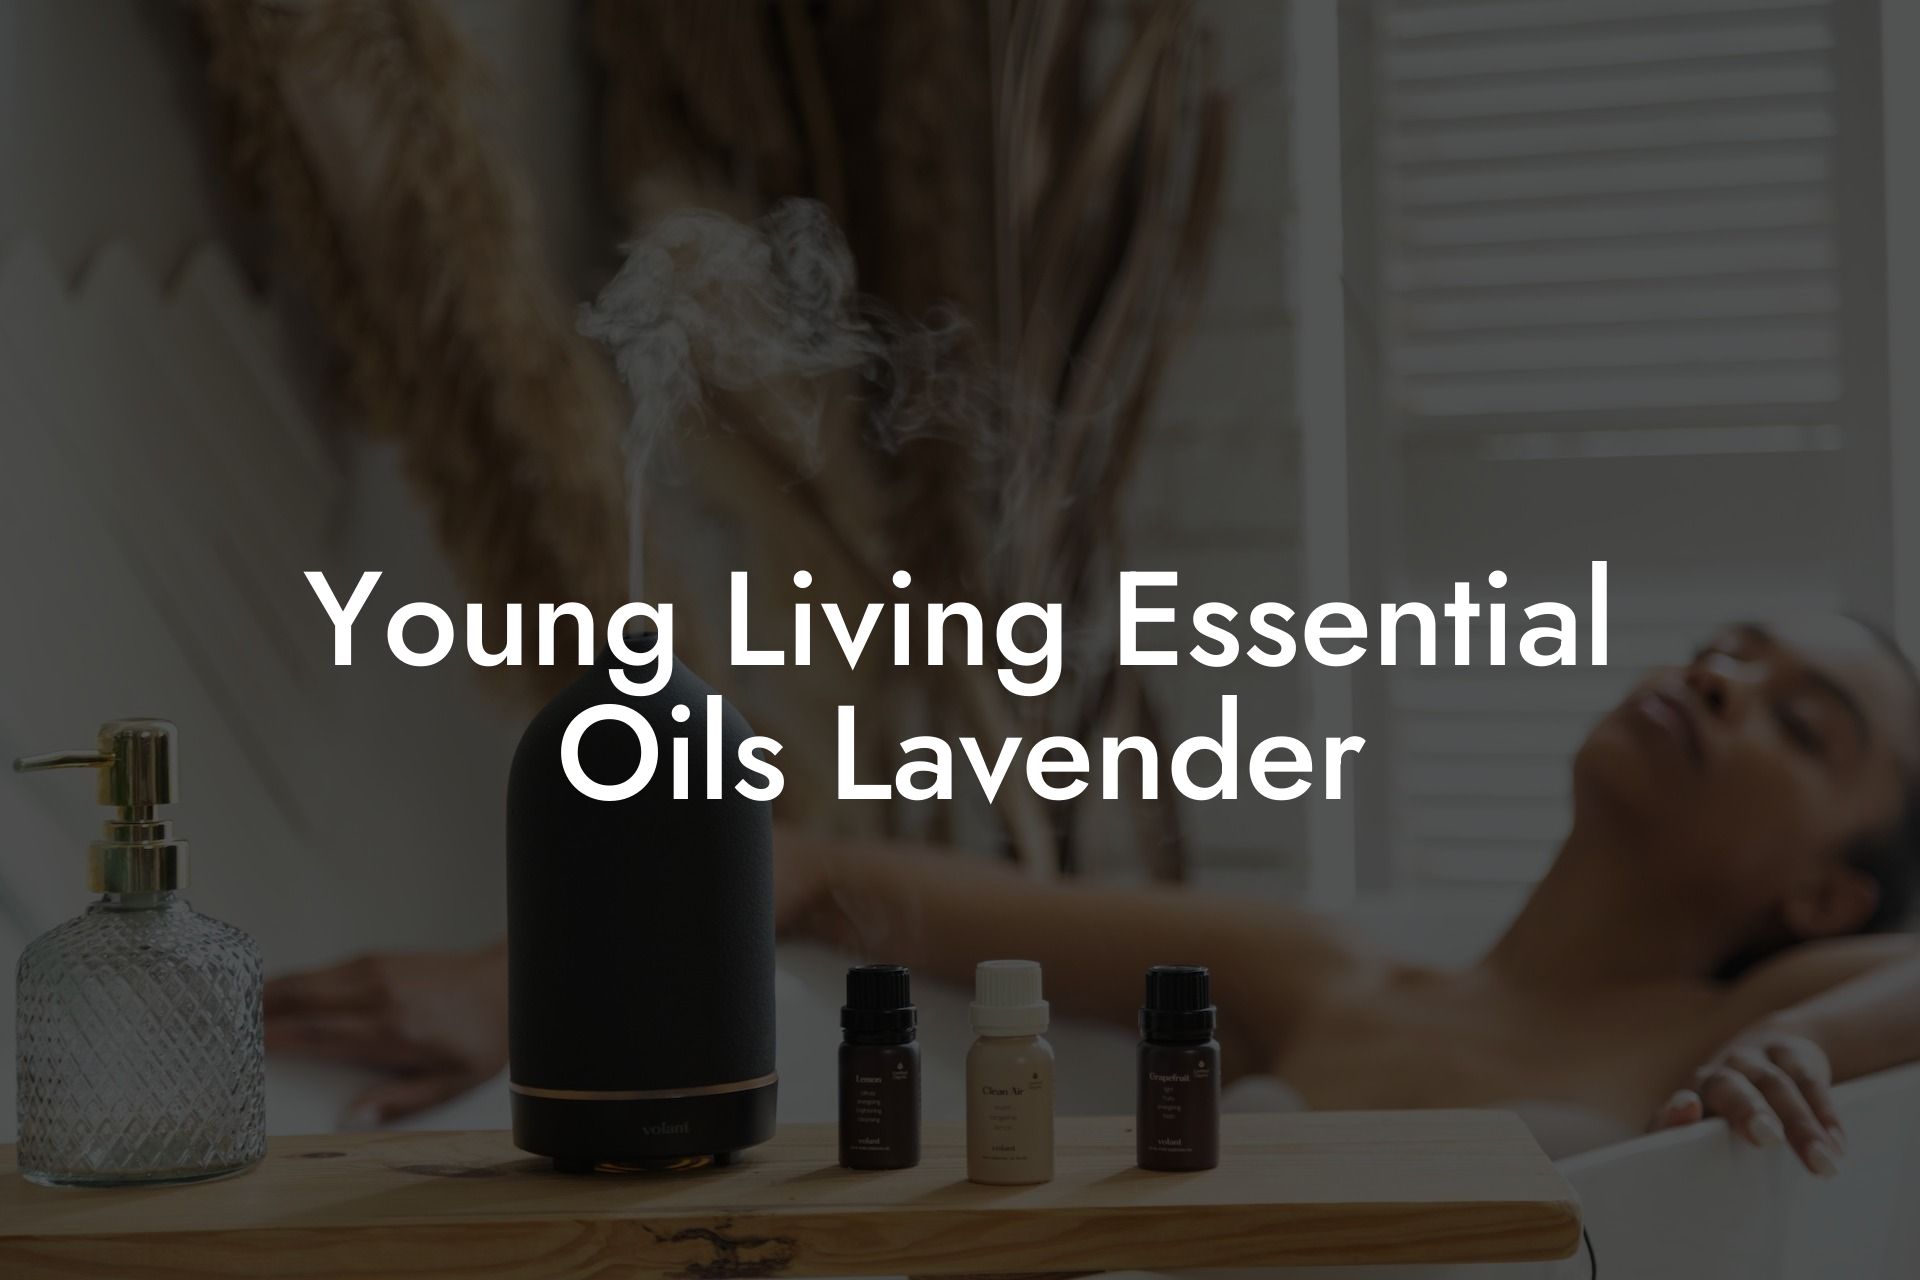 Young Living Essential Oils Lavender